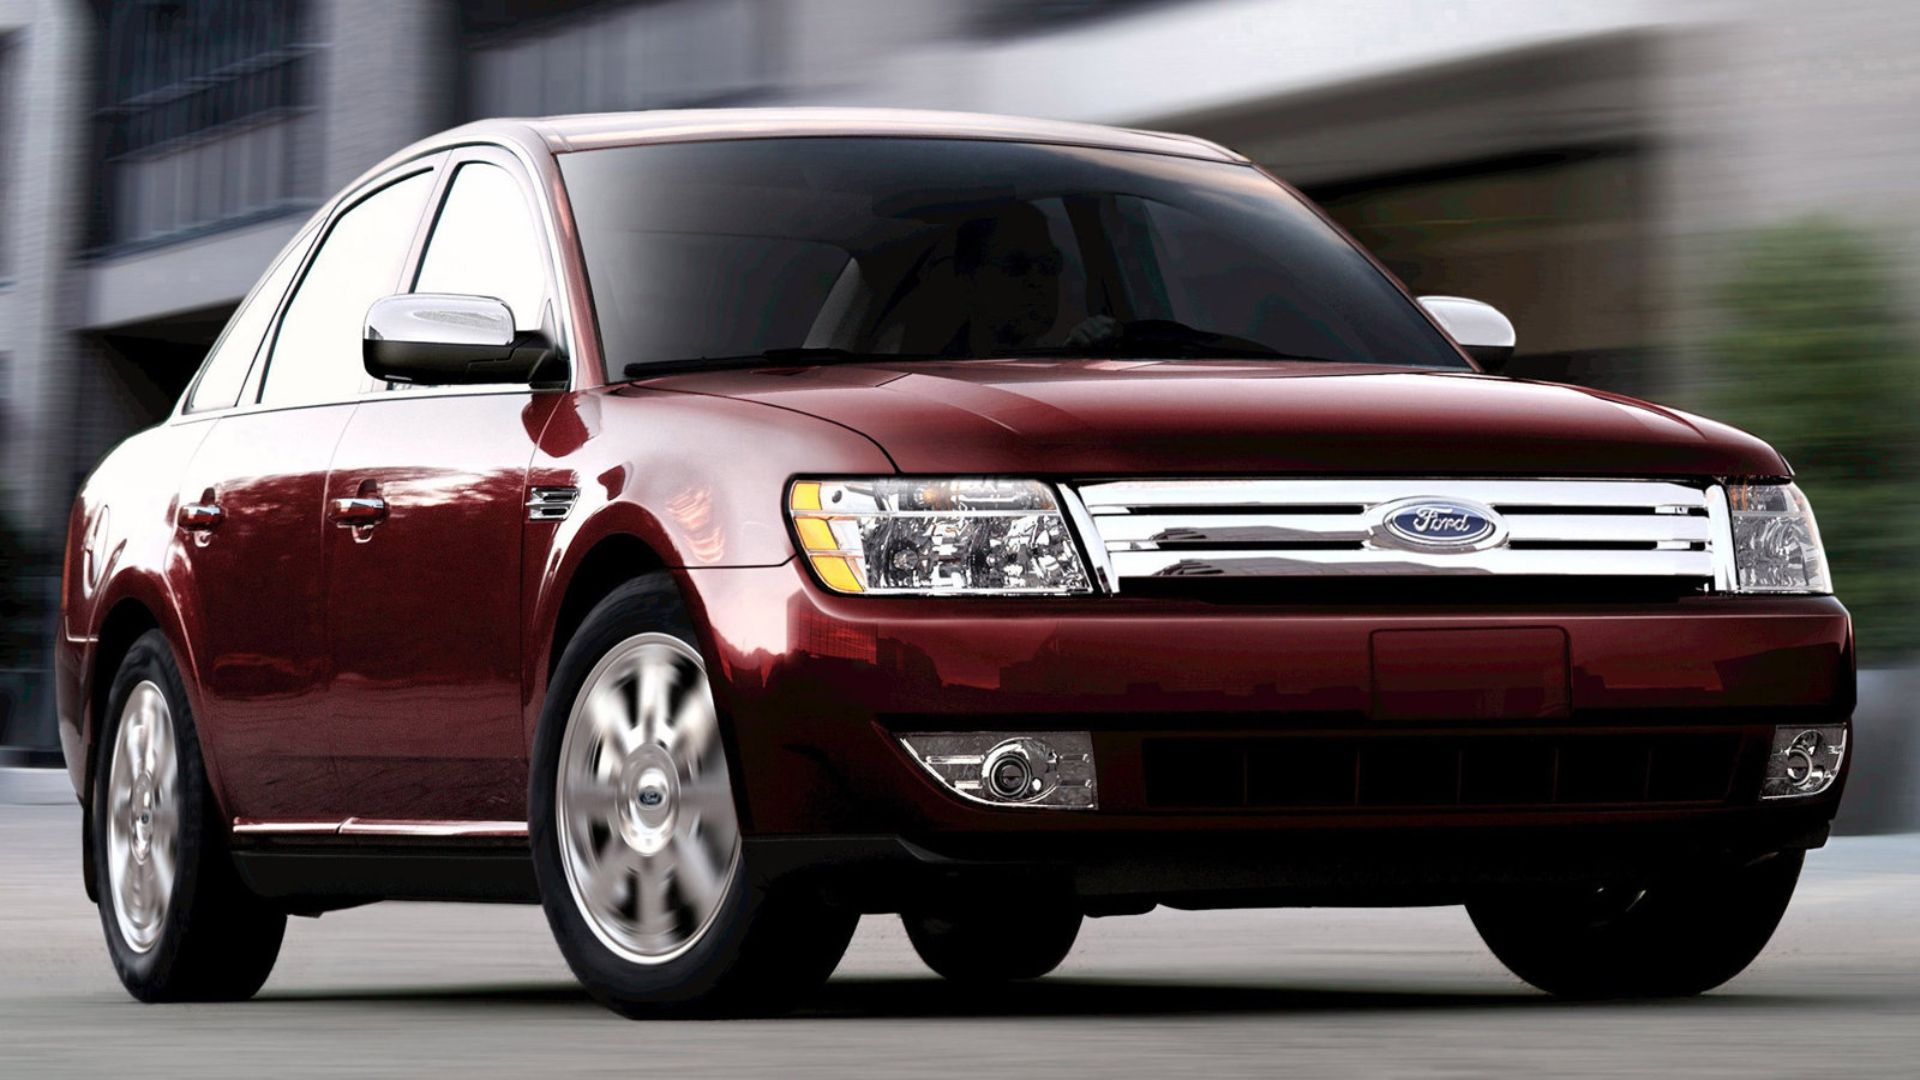 2008 Ford Taurus front 3_4